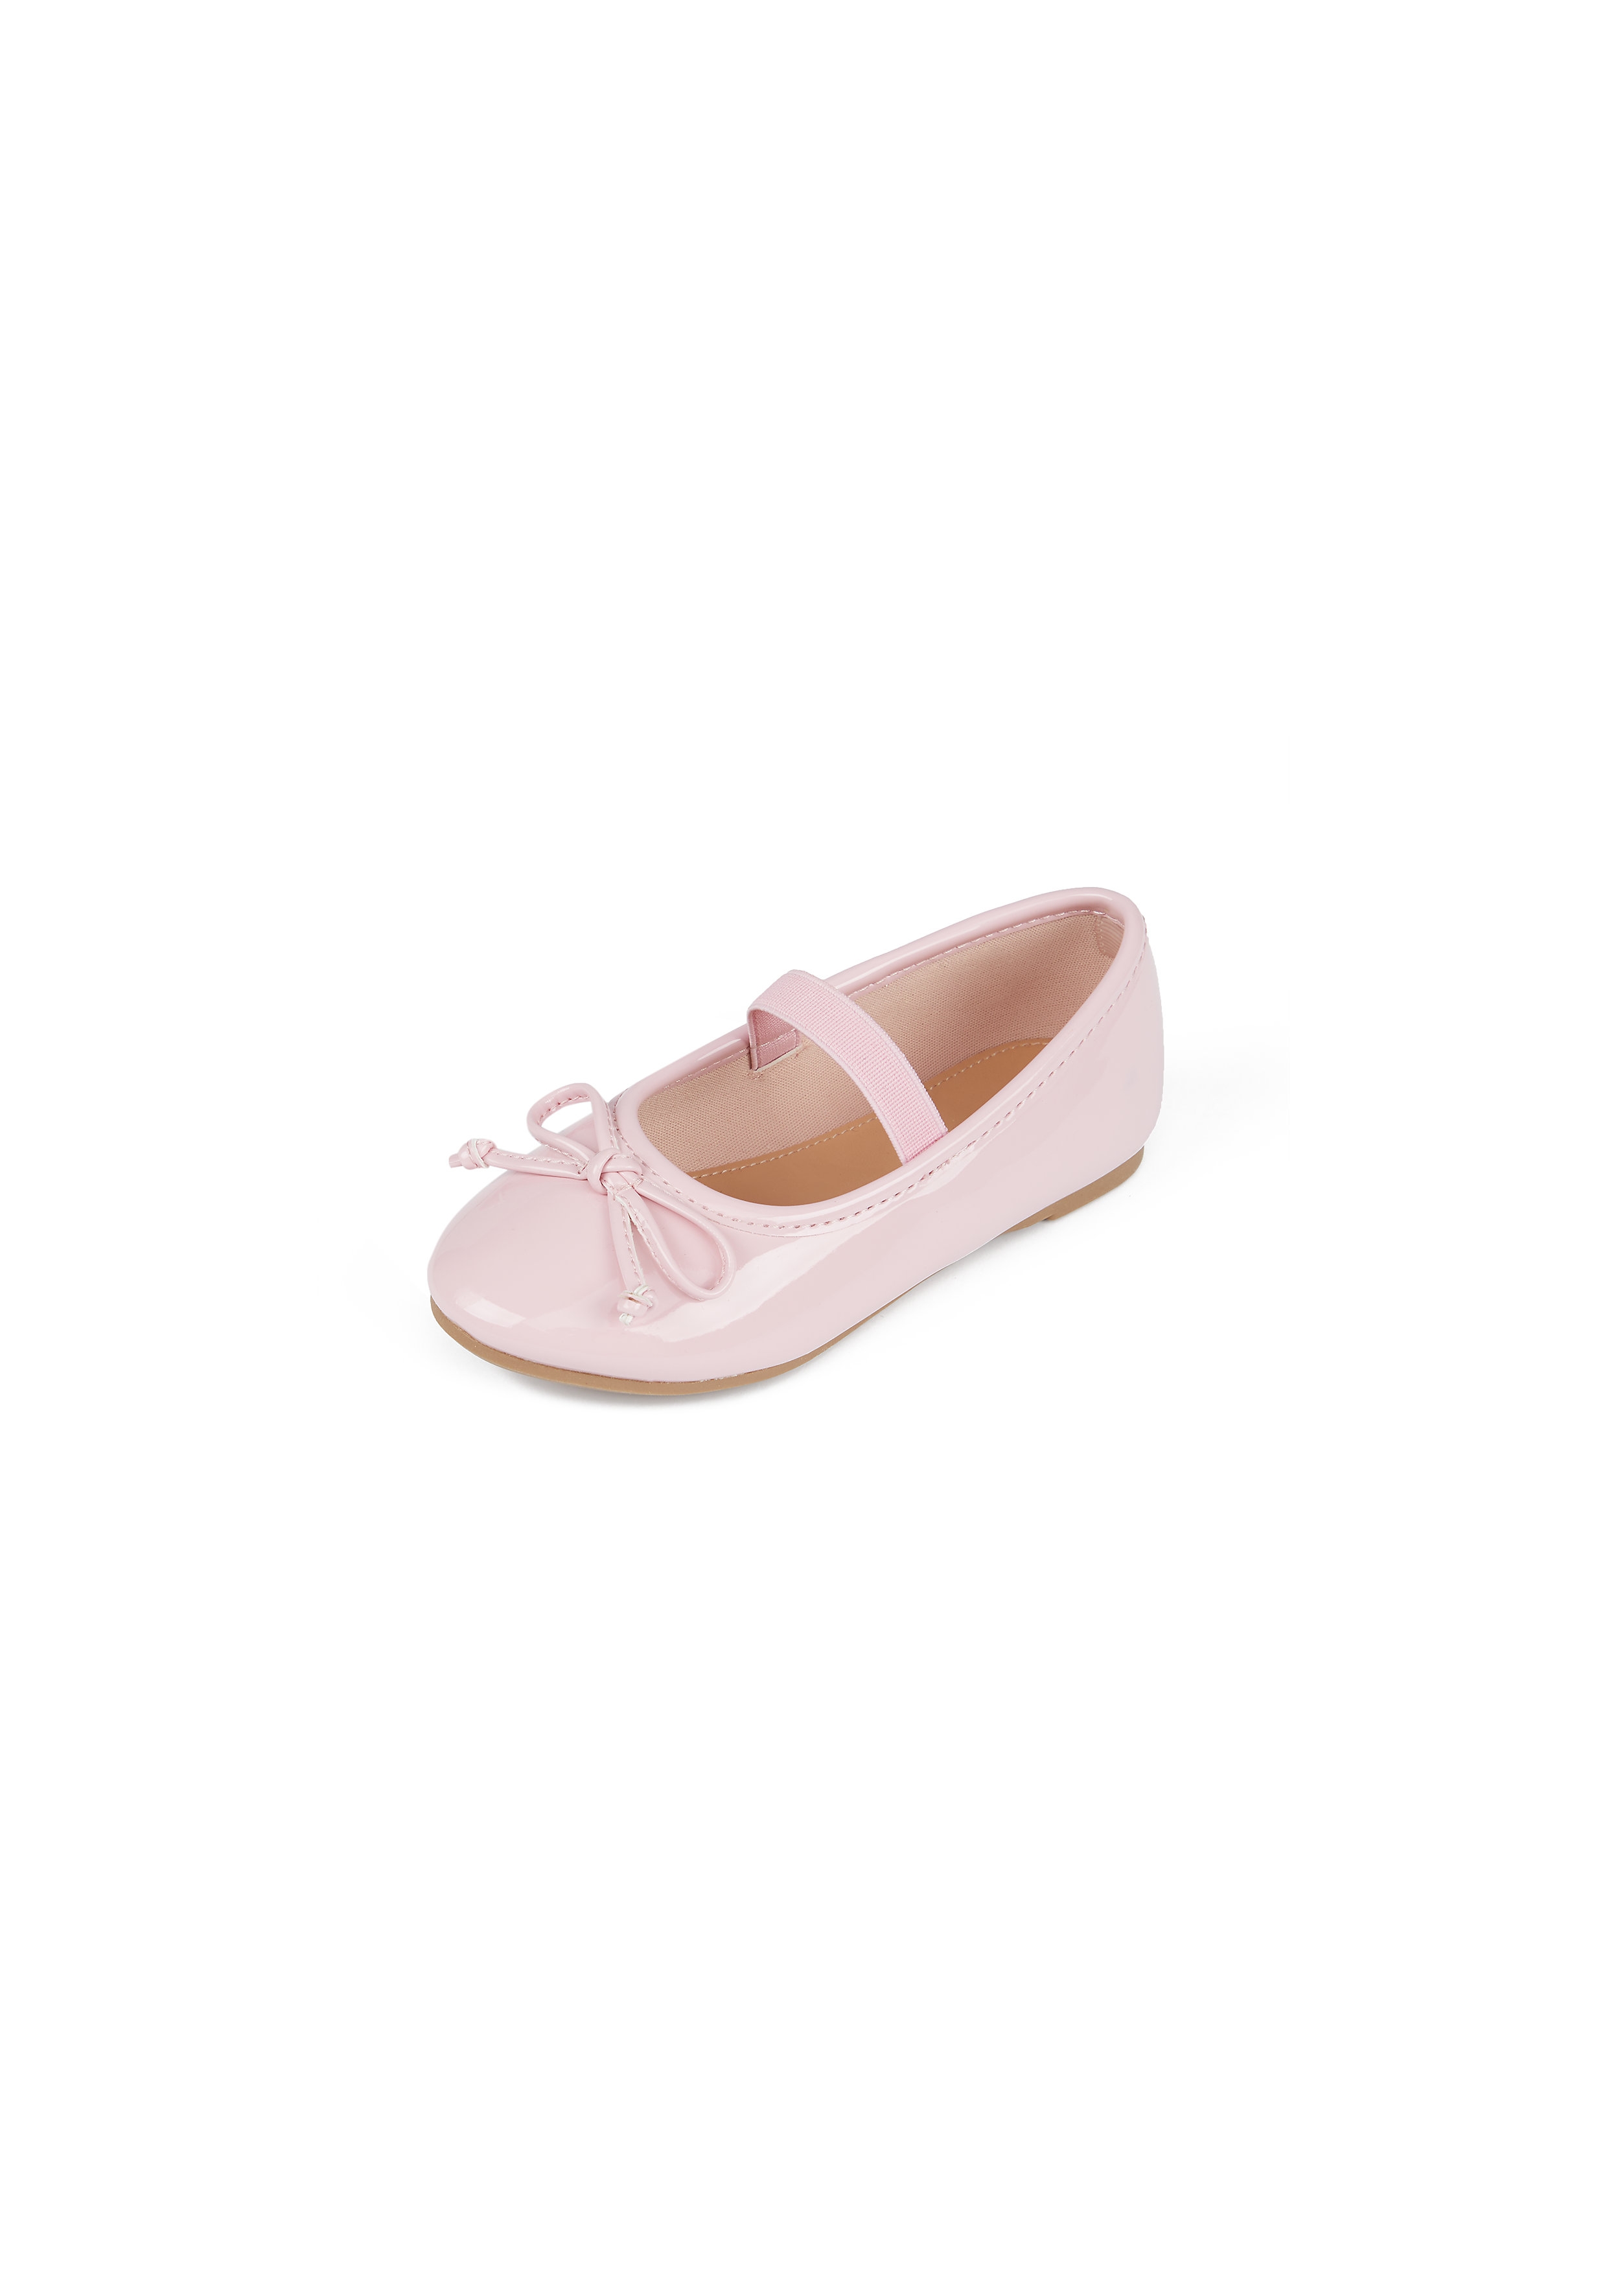 Mothercare | Girls Ballerina Shoes Bow Detail - Pink 1